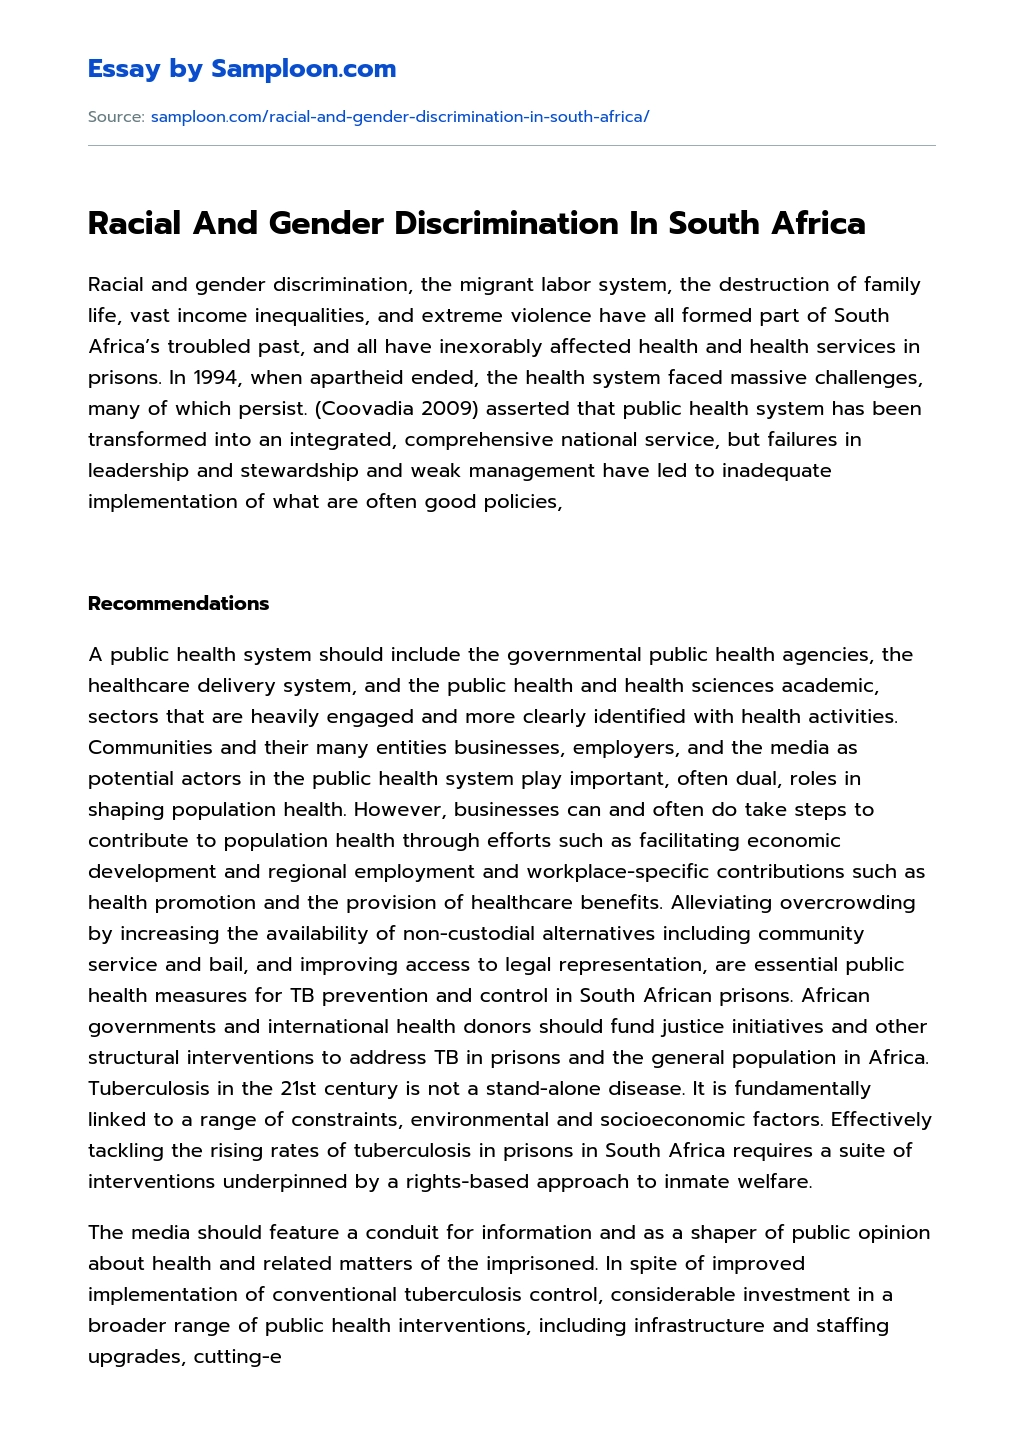 Racial And Gender Discrimination In South Africa essay